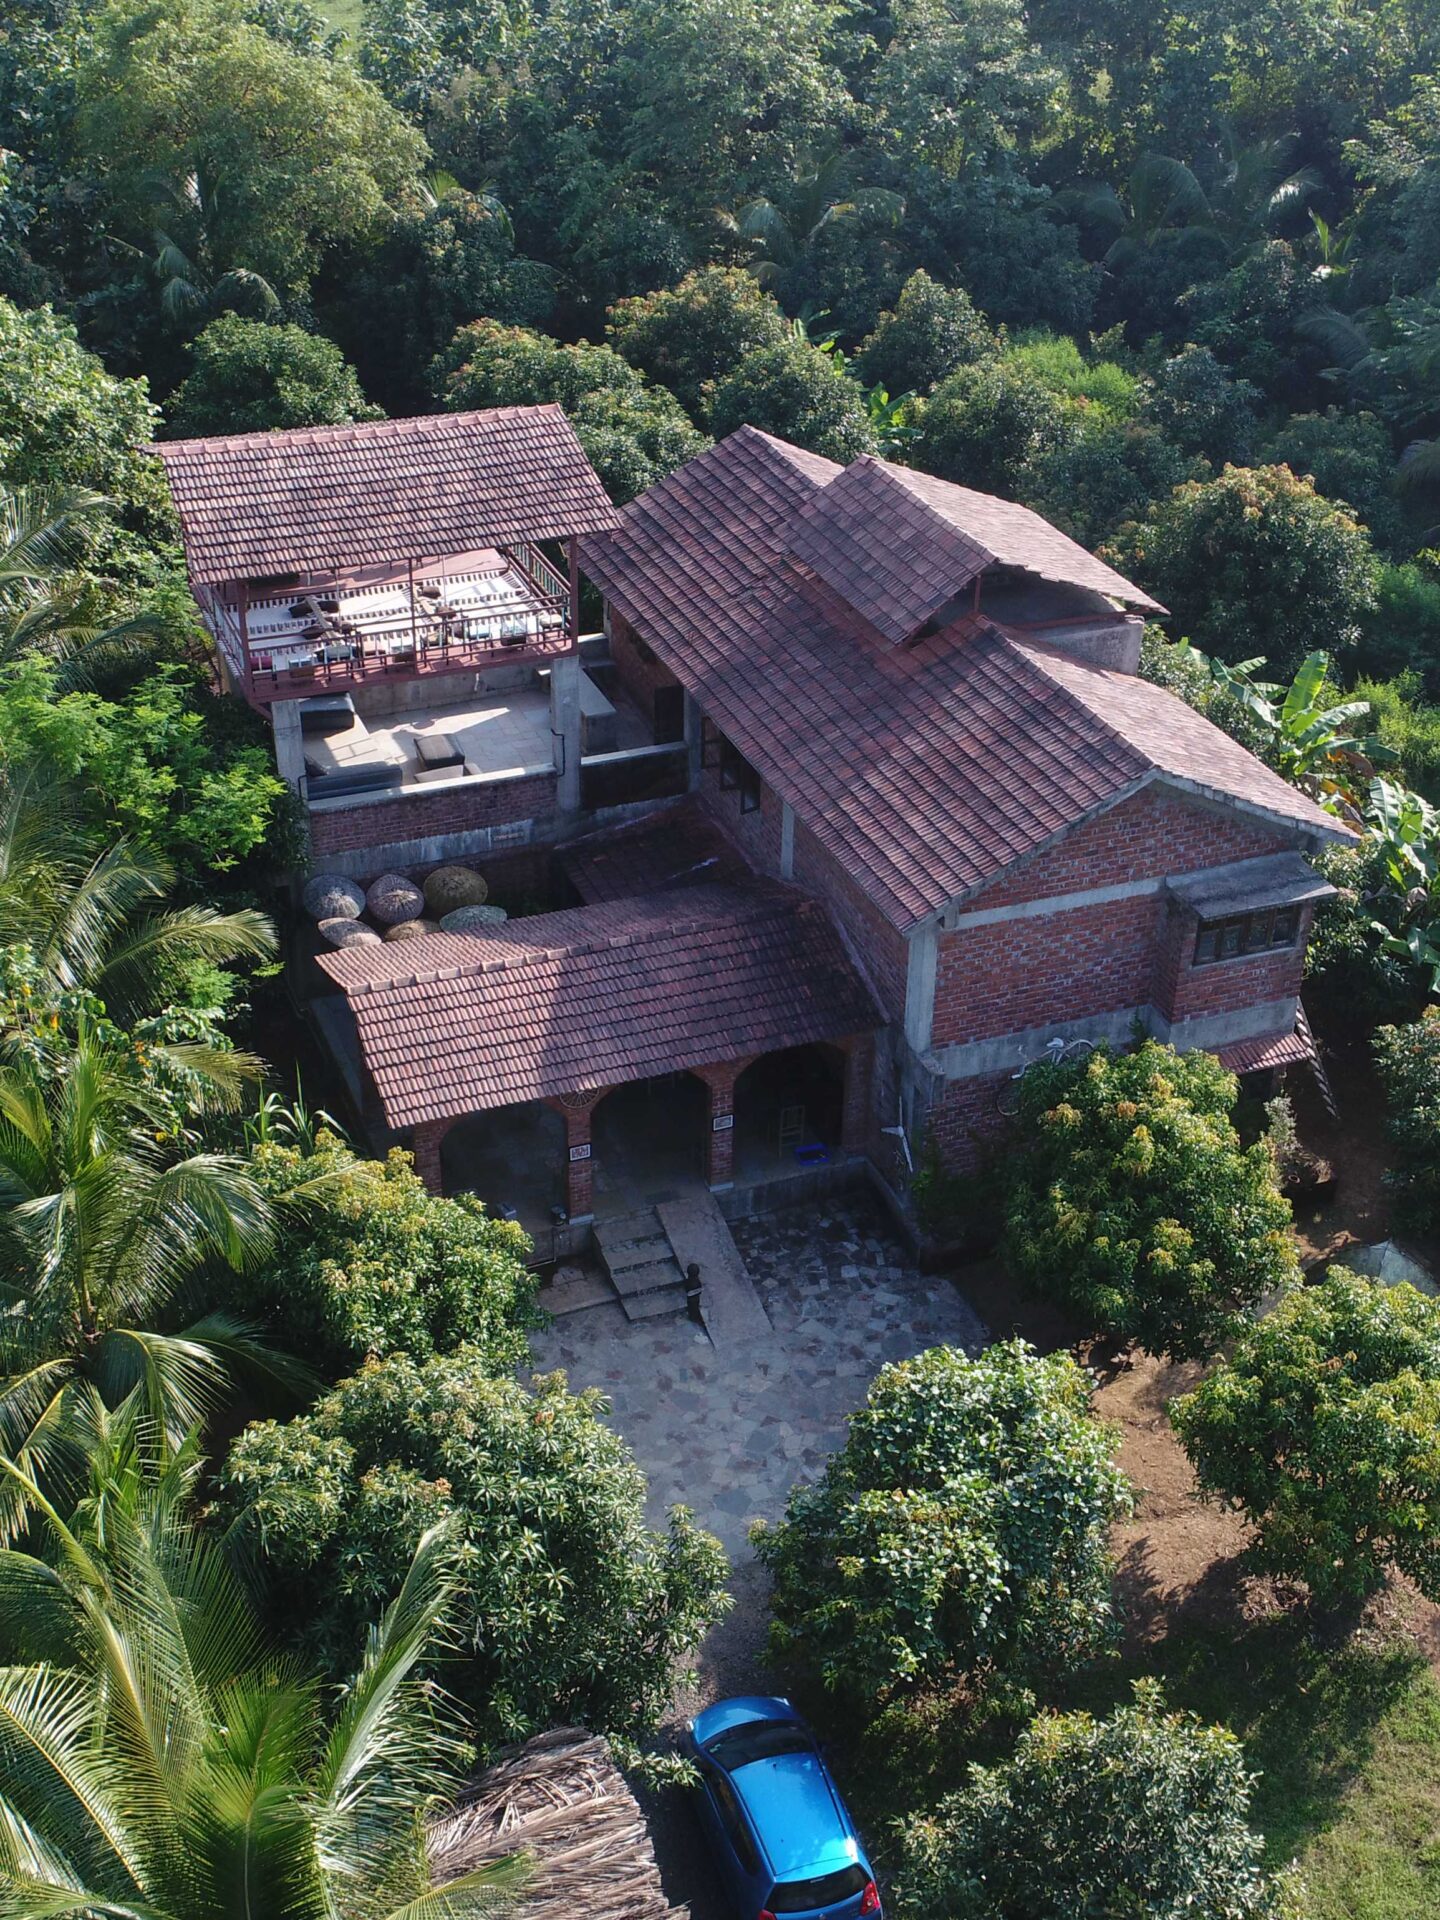 The best farm stays outside of Mumbai | An aerial view of Arwa Farms, surrounded by forest